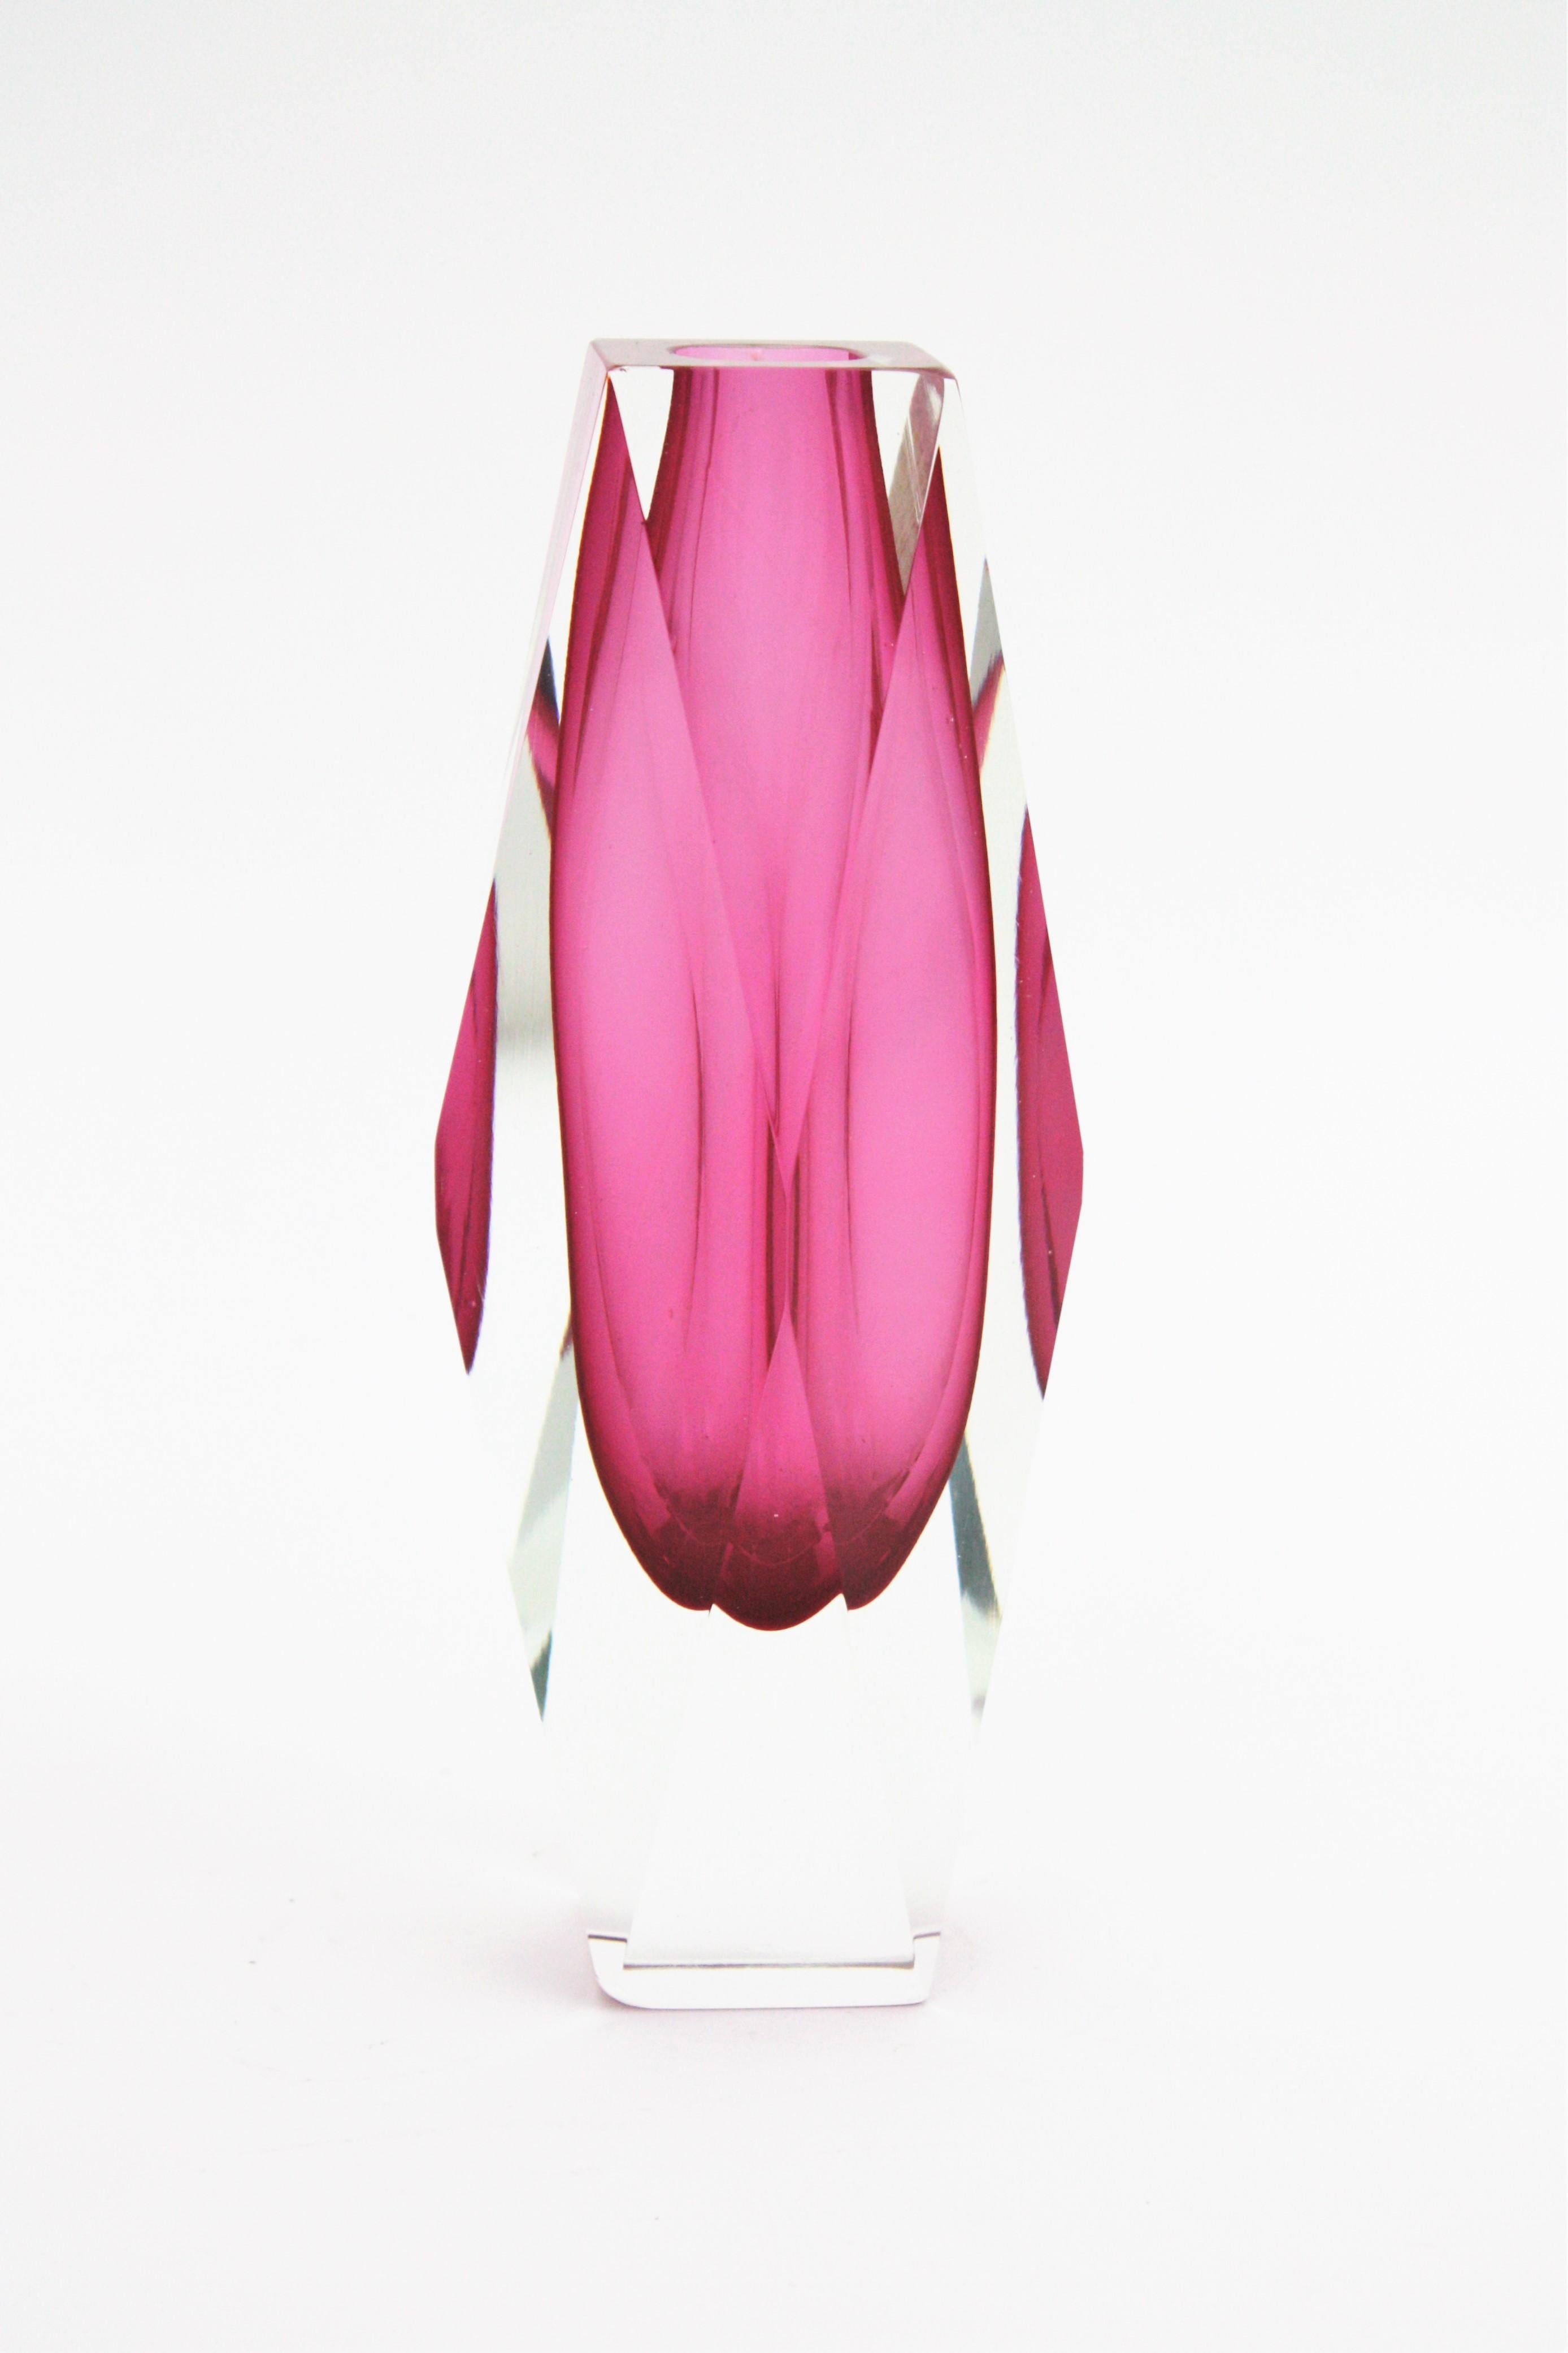 A colorful pink Sommerso Murano glass faceted vase attributed to Mandruzzato. Italy, 1960s.
Pink glass with a line in pink- fuchsia glass cased into clear glass.
Excellent condition. No chips, no cracks to notice. Beautiful to place with other